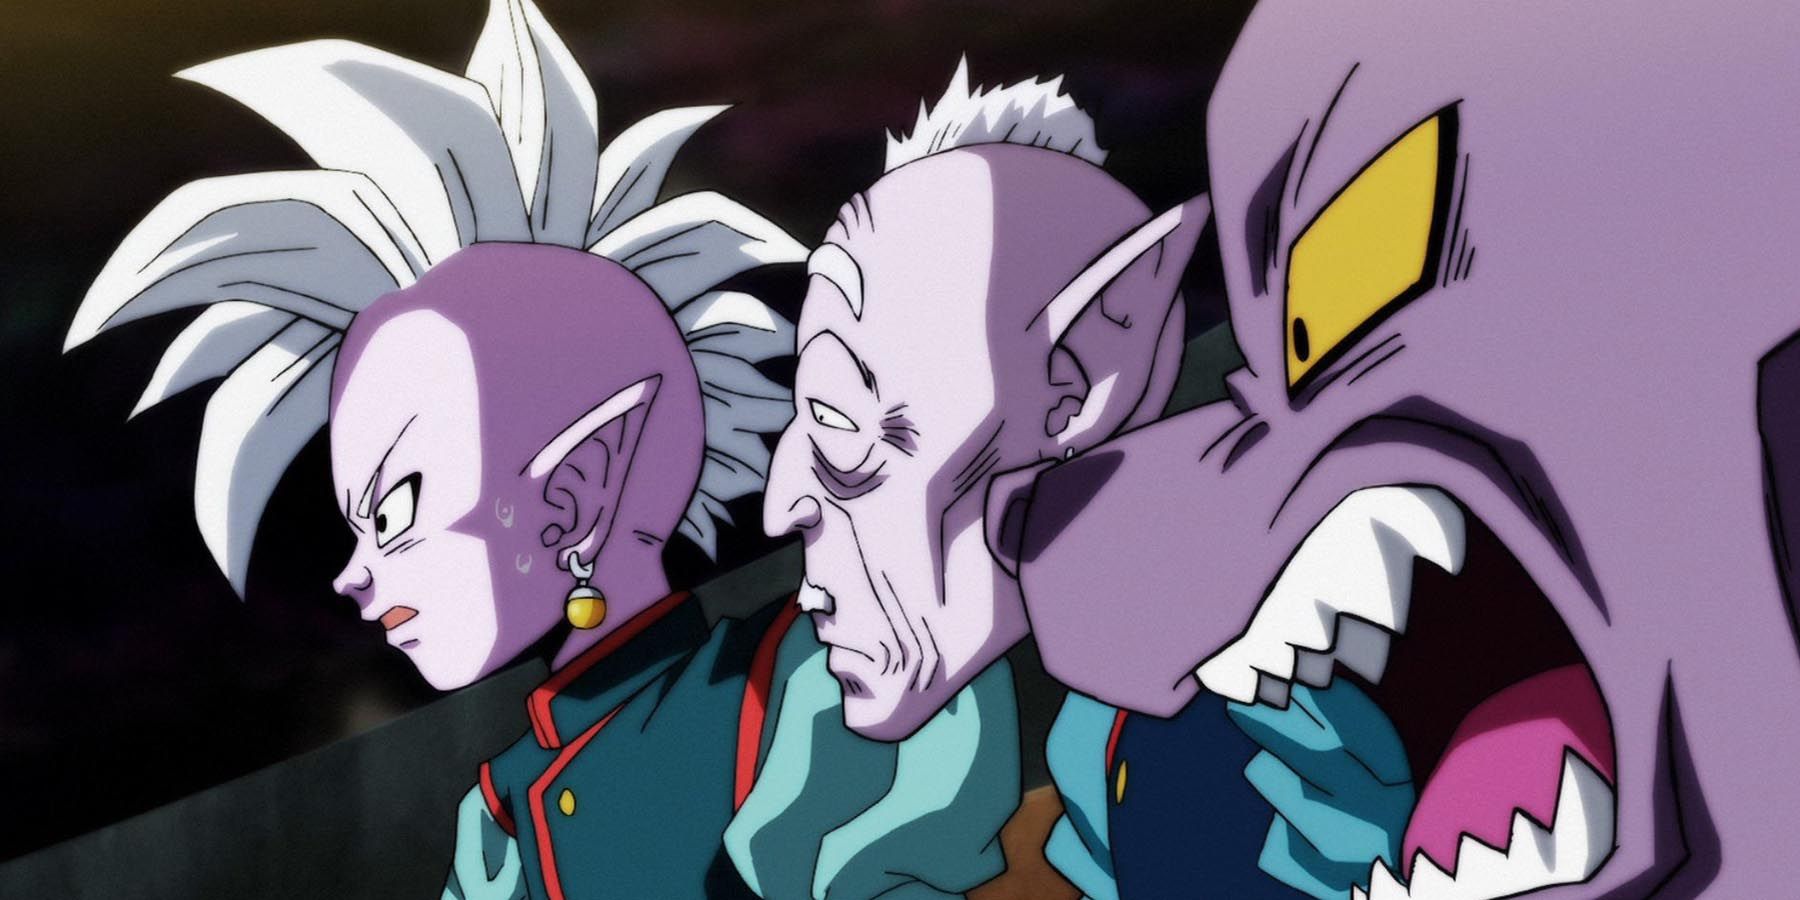 Beerus, Shin, and Old Kai react to the Tournament of Power in Dragon Ball Super